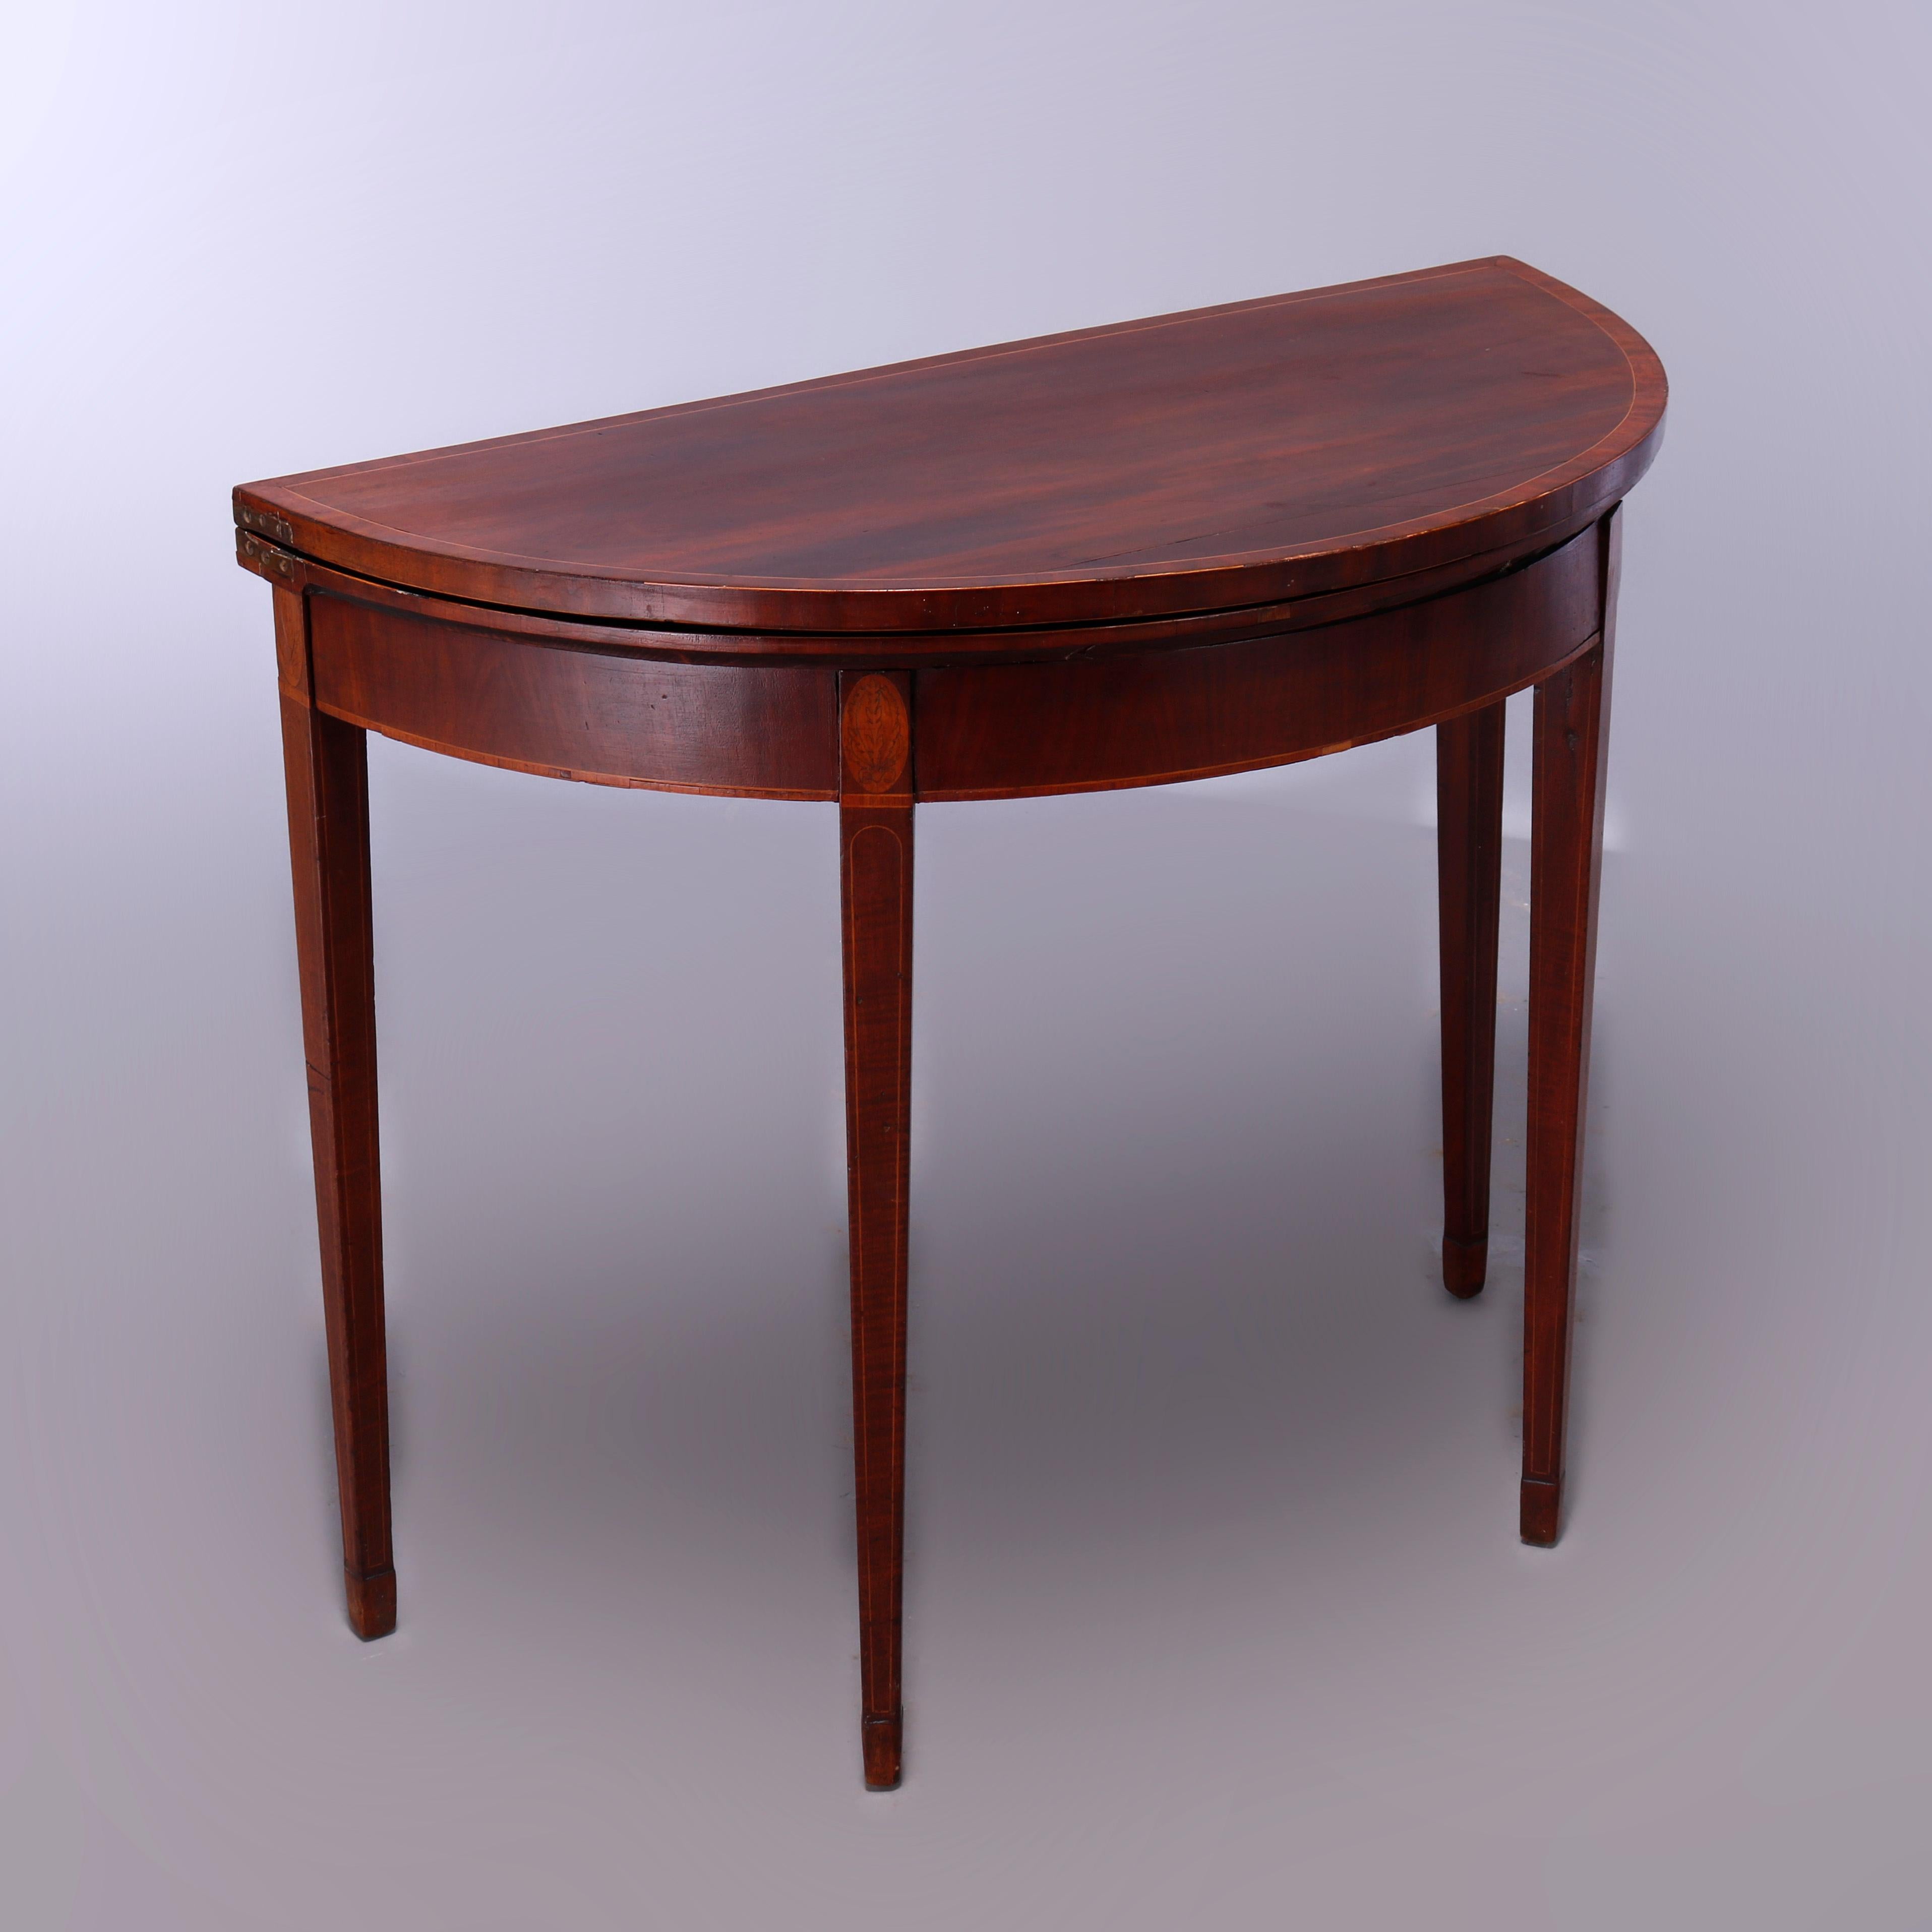 An antique Hepplewhite game table offers Mahogany construction in demilune form with satinwood banding with top opening to sunburst playing surface and raised on tapered square legs having inlaid medallions at the capitals, c1820

Measures-